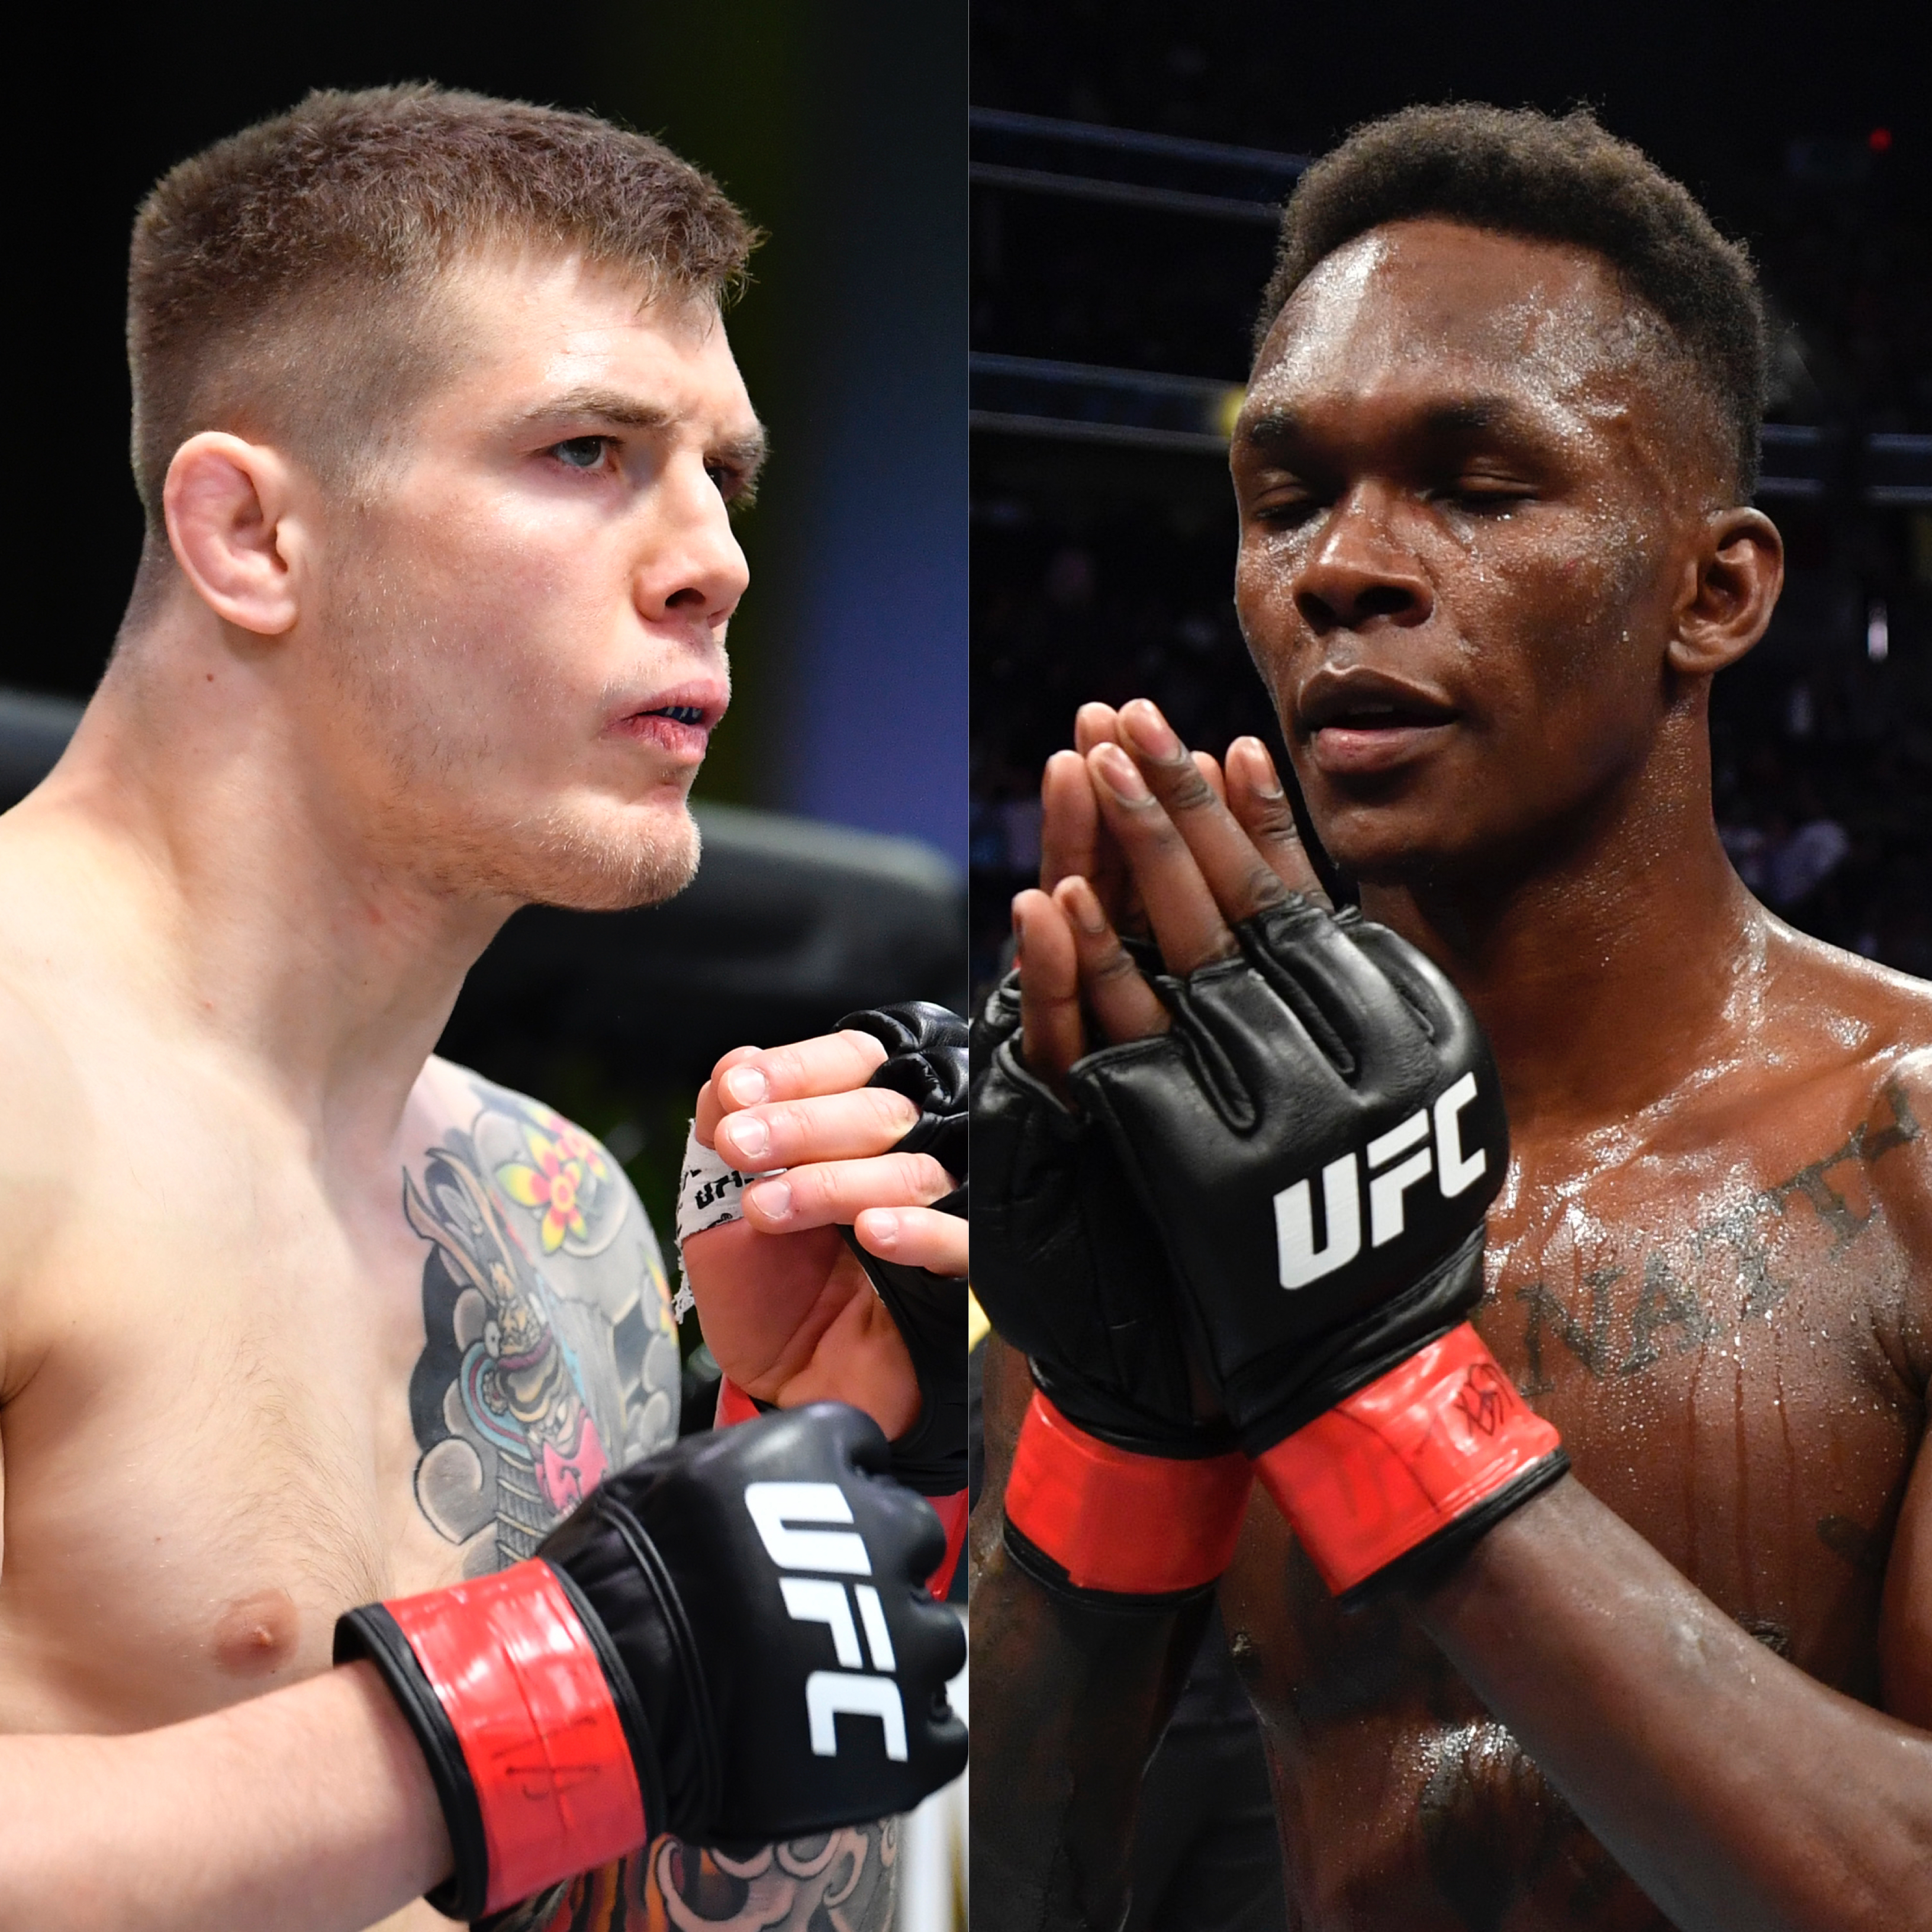 How To Watch Adesanya Vs Vettori 2 Nate Diaz S Return And Every Fight At Ufc 263 Espn Plus Ppv Price Card Odds Time Tv 6 12 21 Oregonlive Com